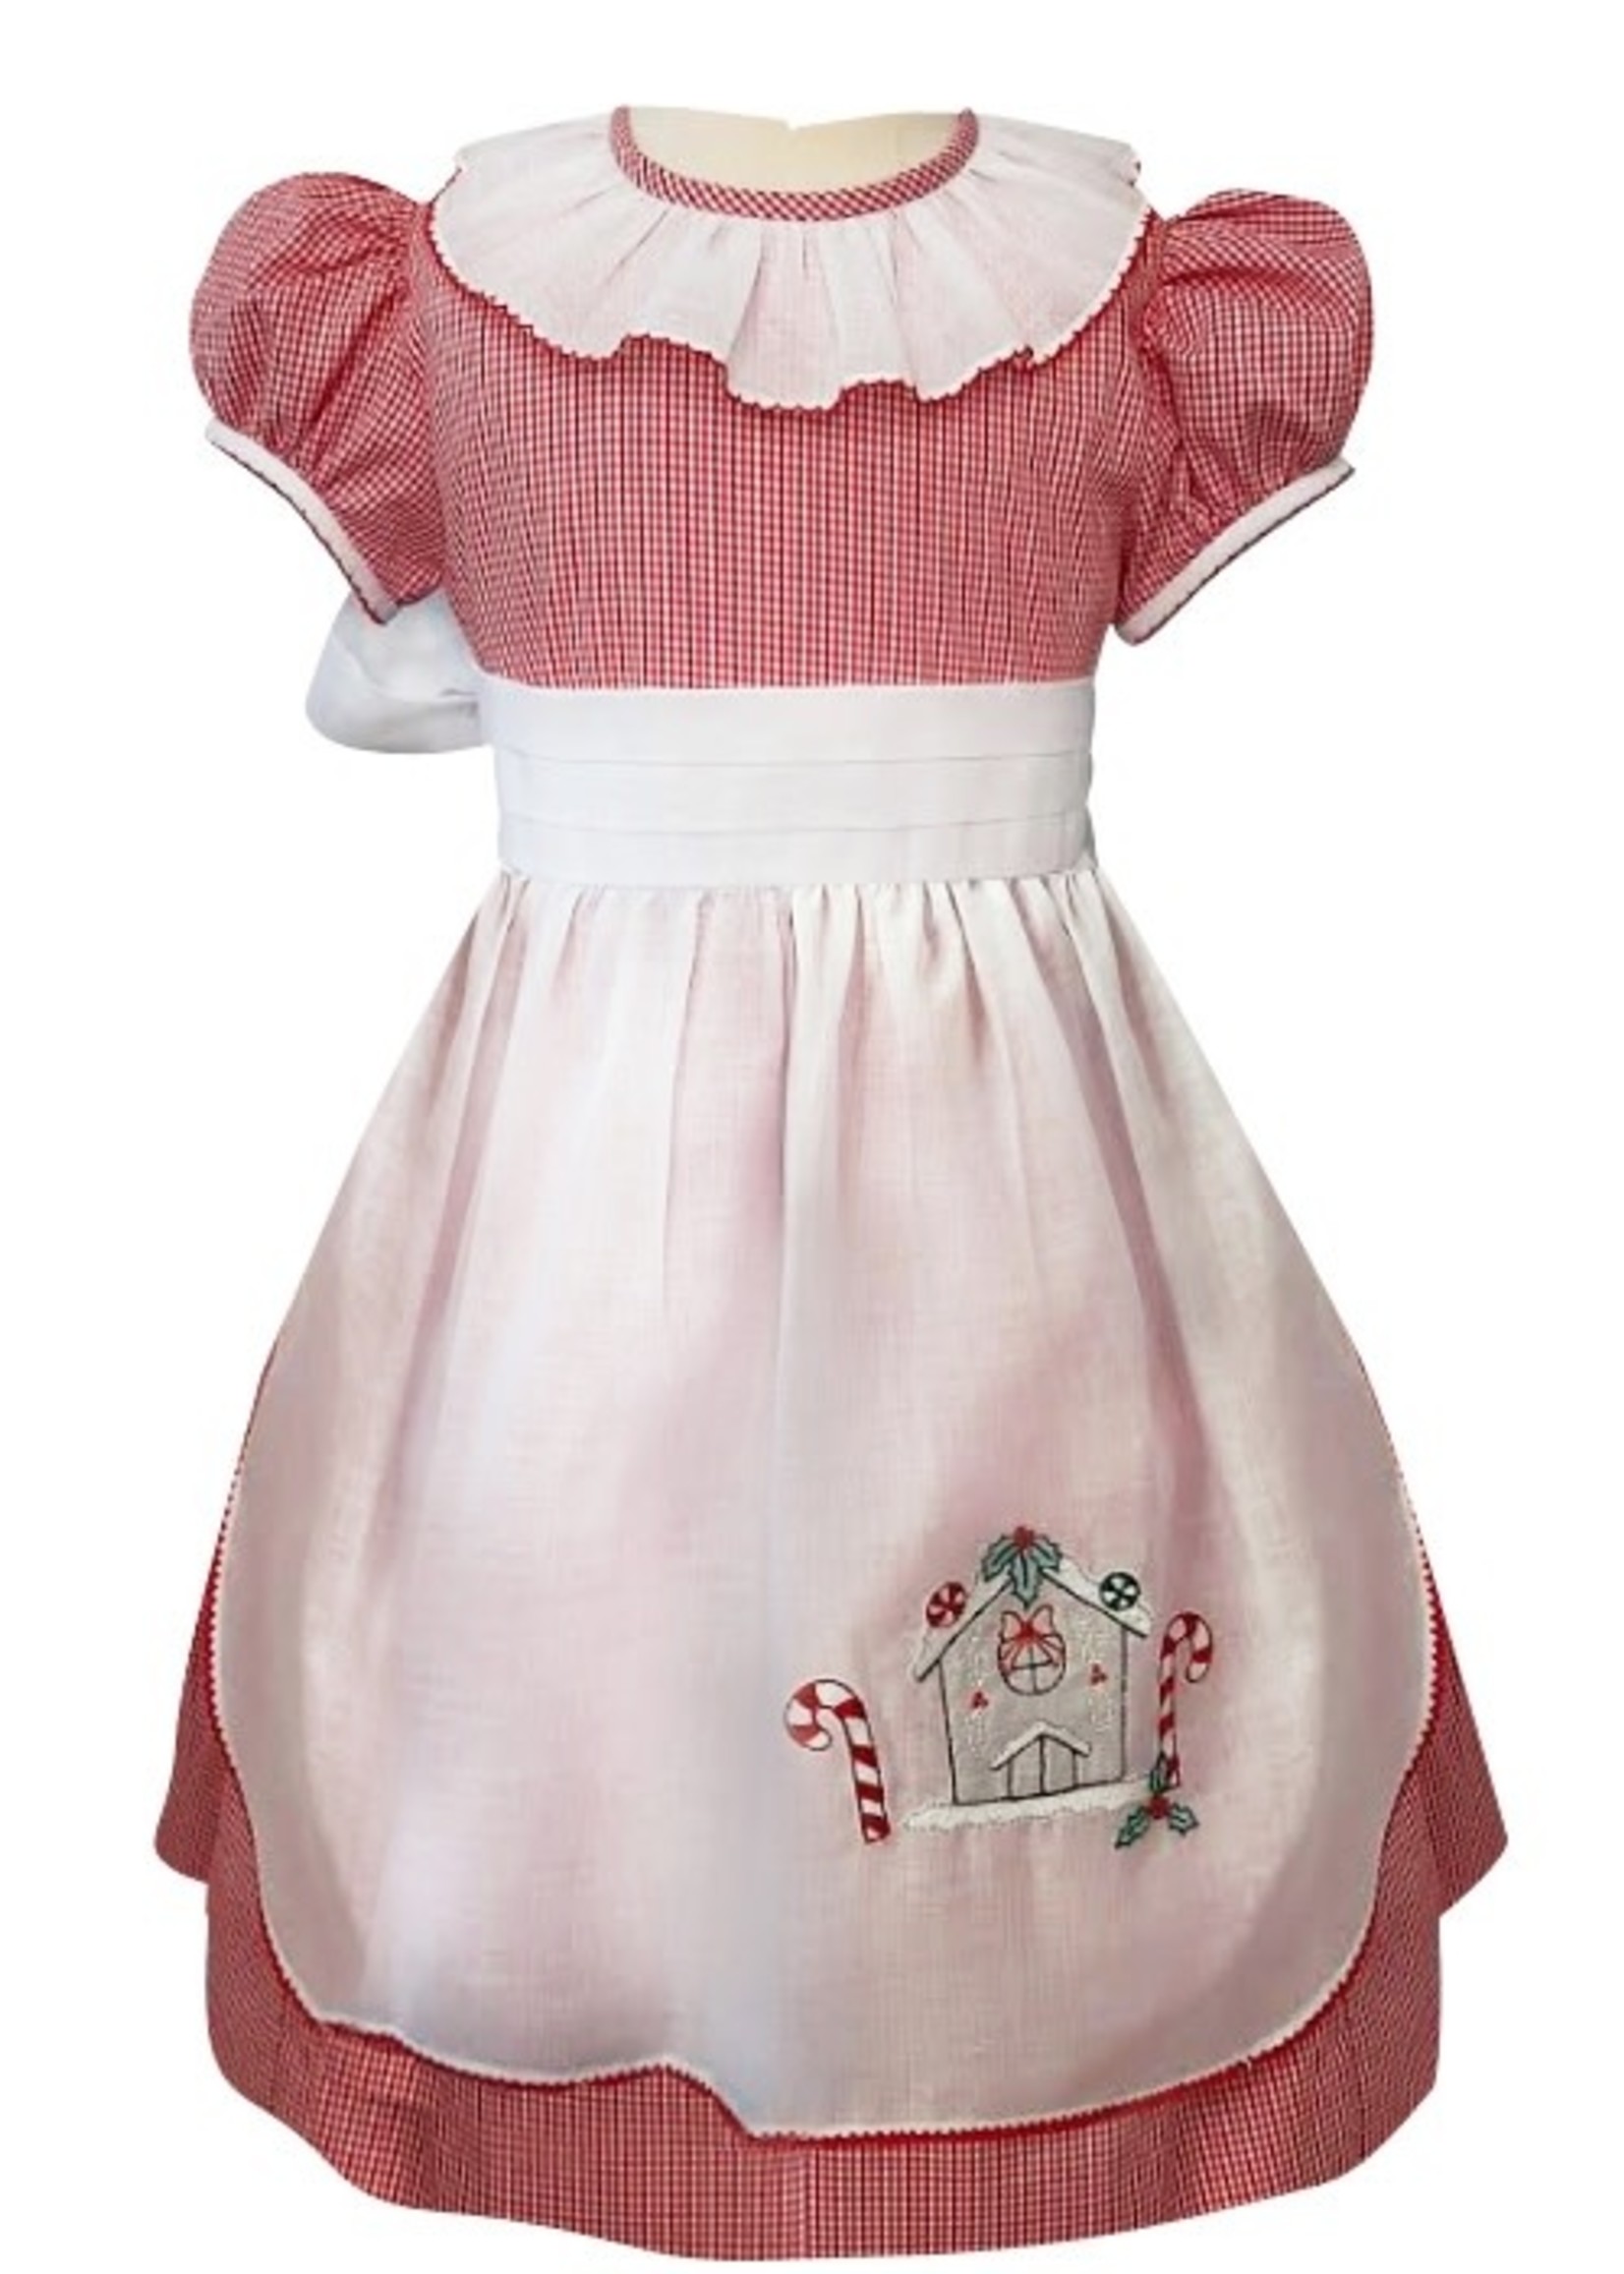 Marco & Lizzy Gingerbread House Apron Dress